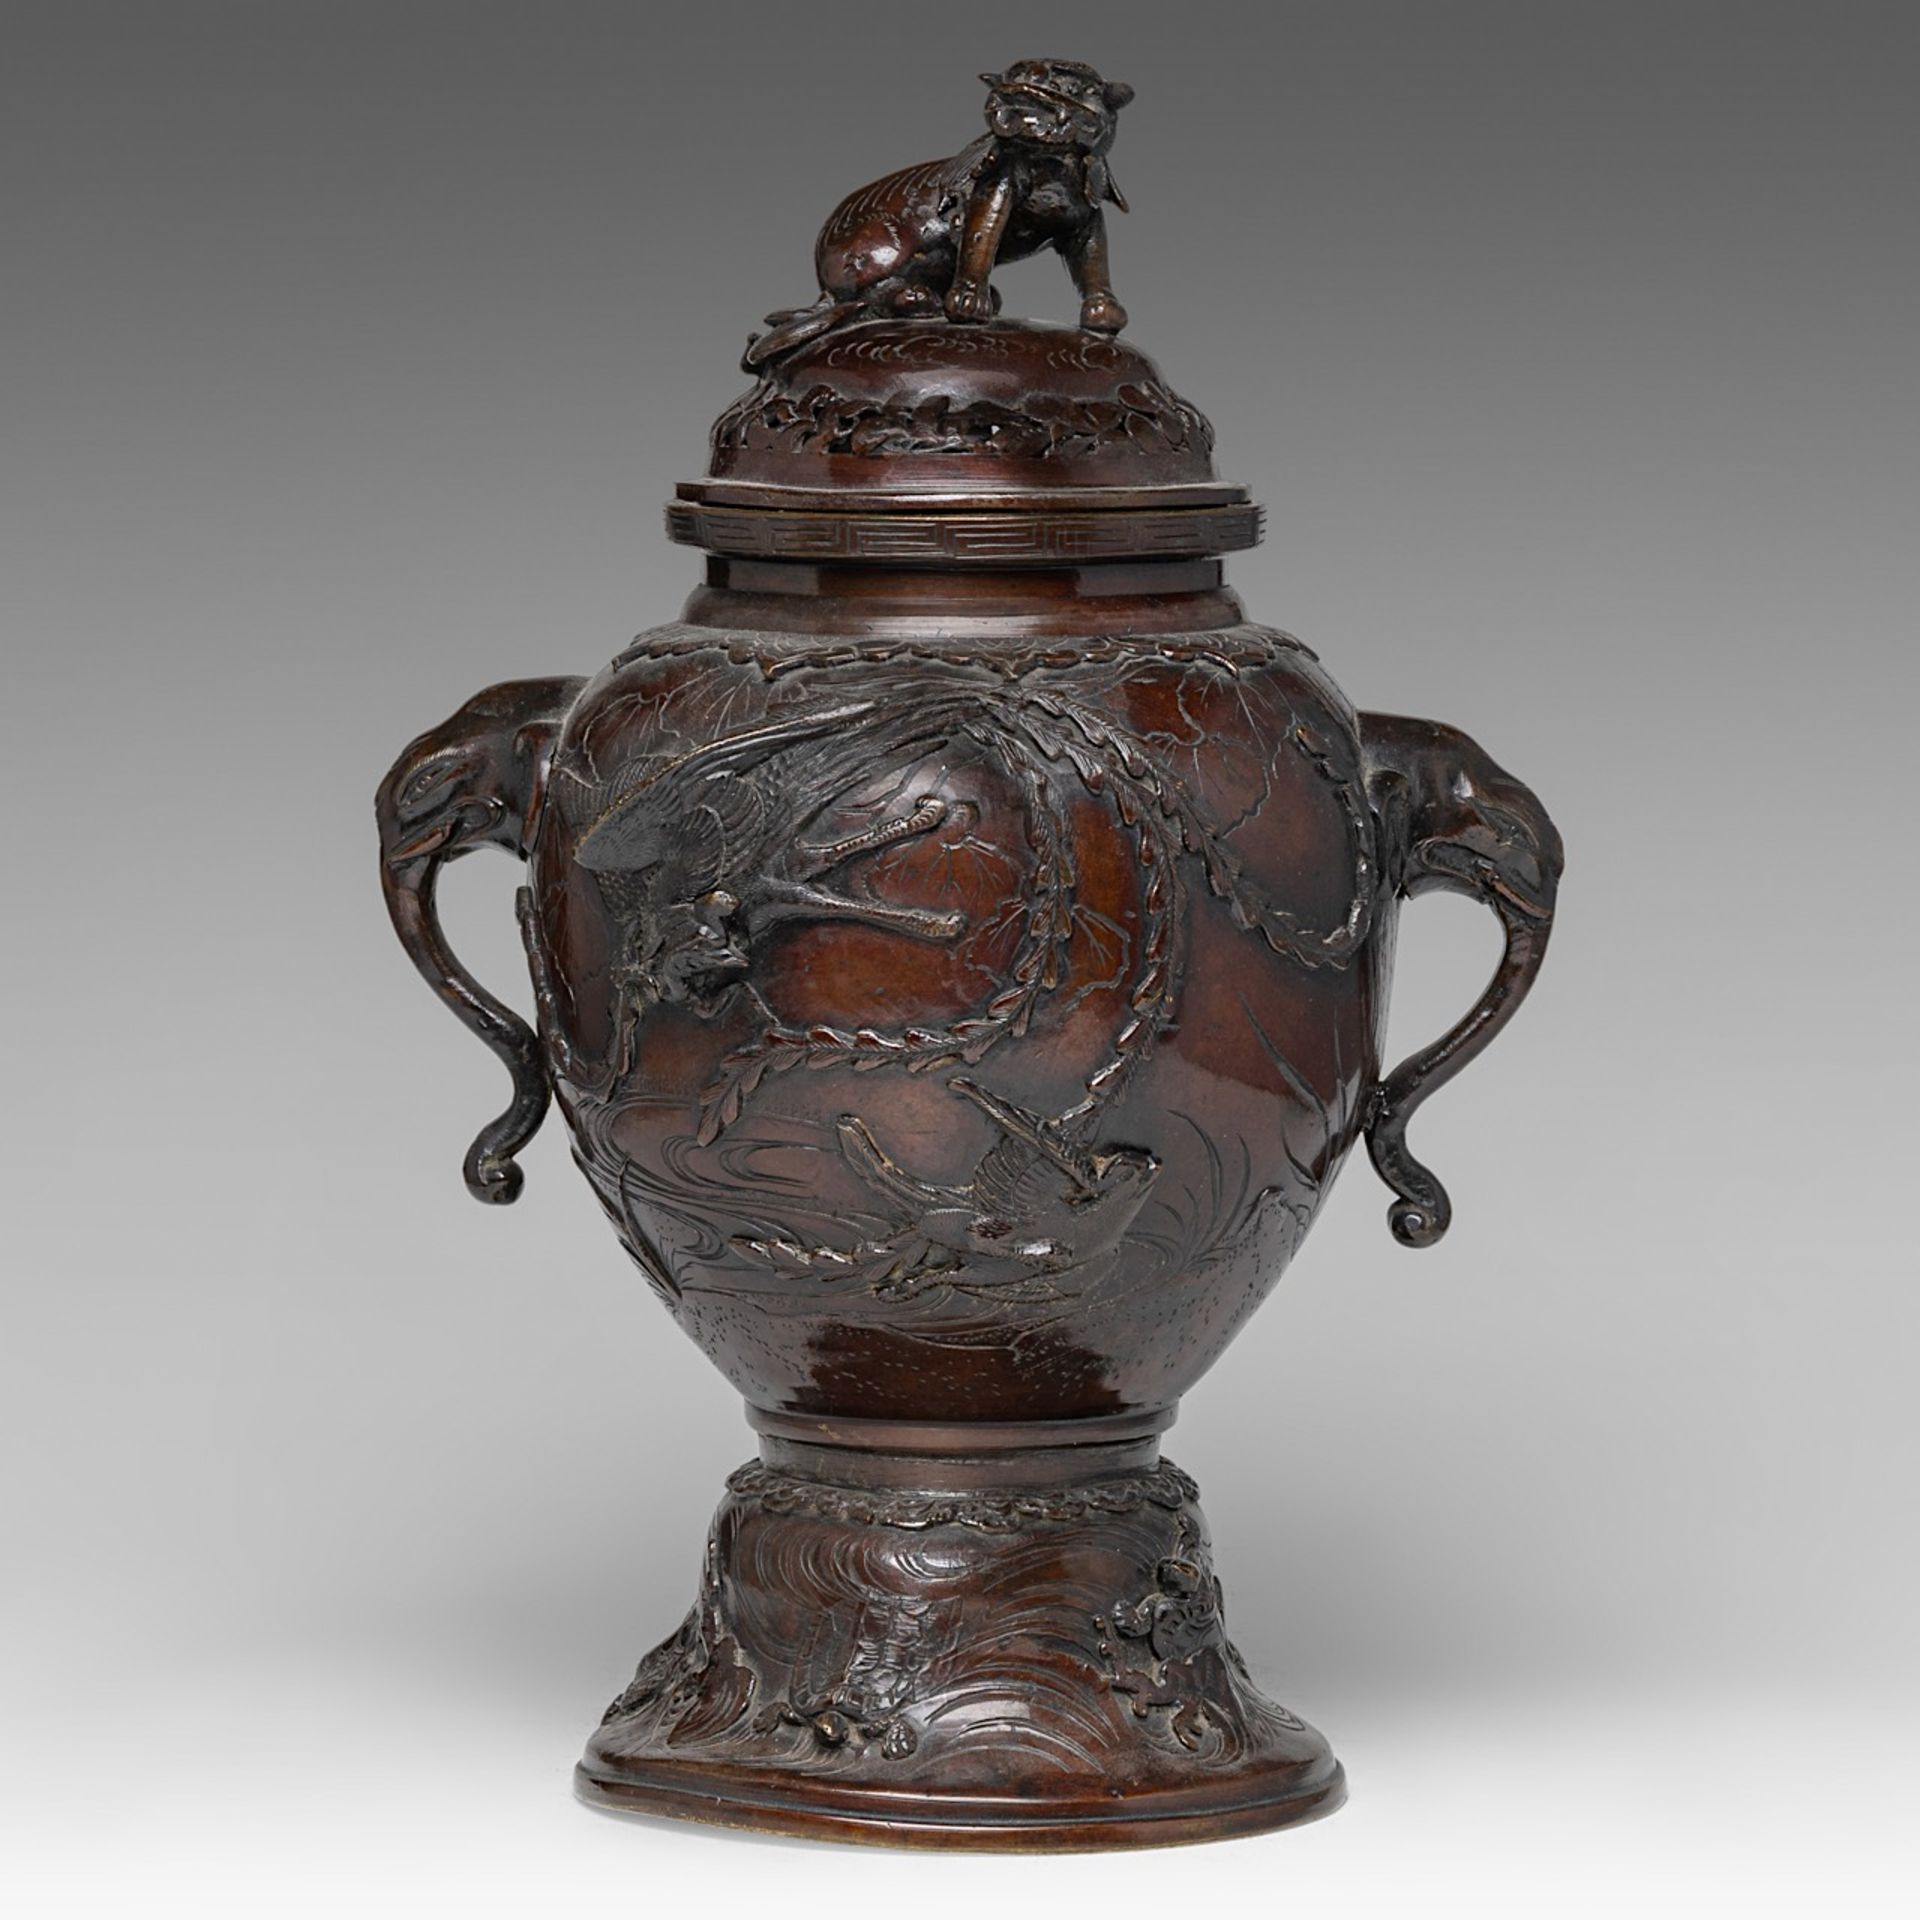 A Japanese bronze censer, paired with elephant-head handles, Meiji period (1868-1912, H 43 cm